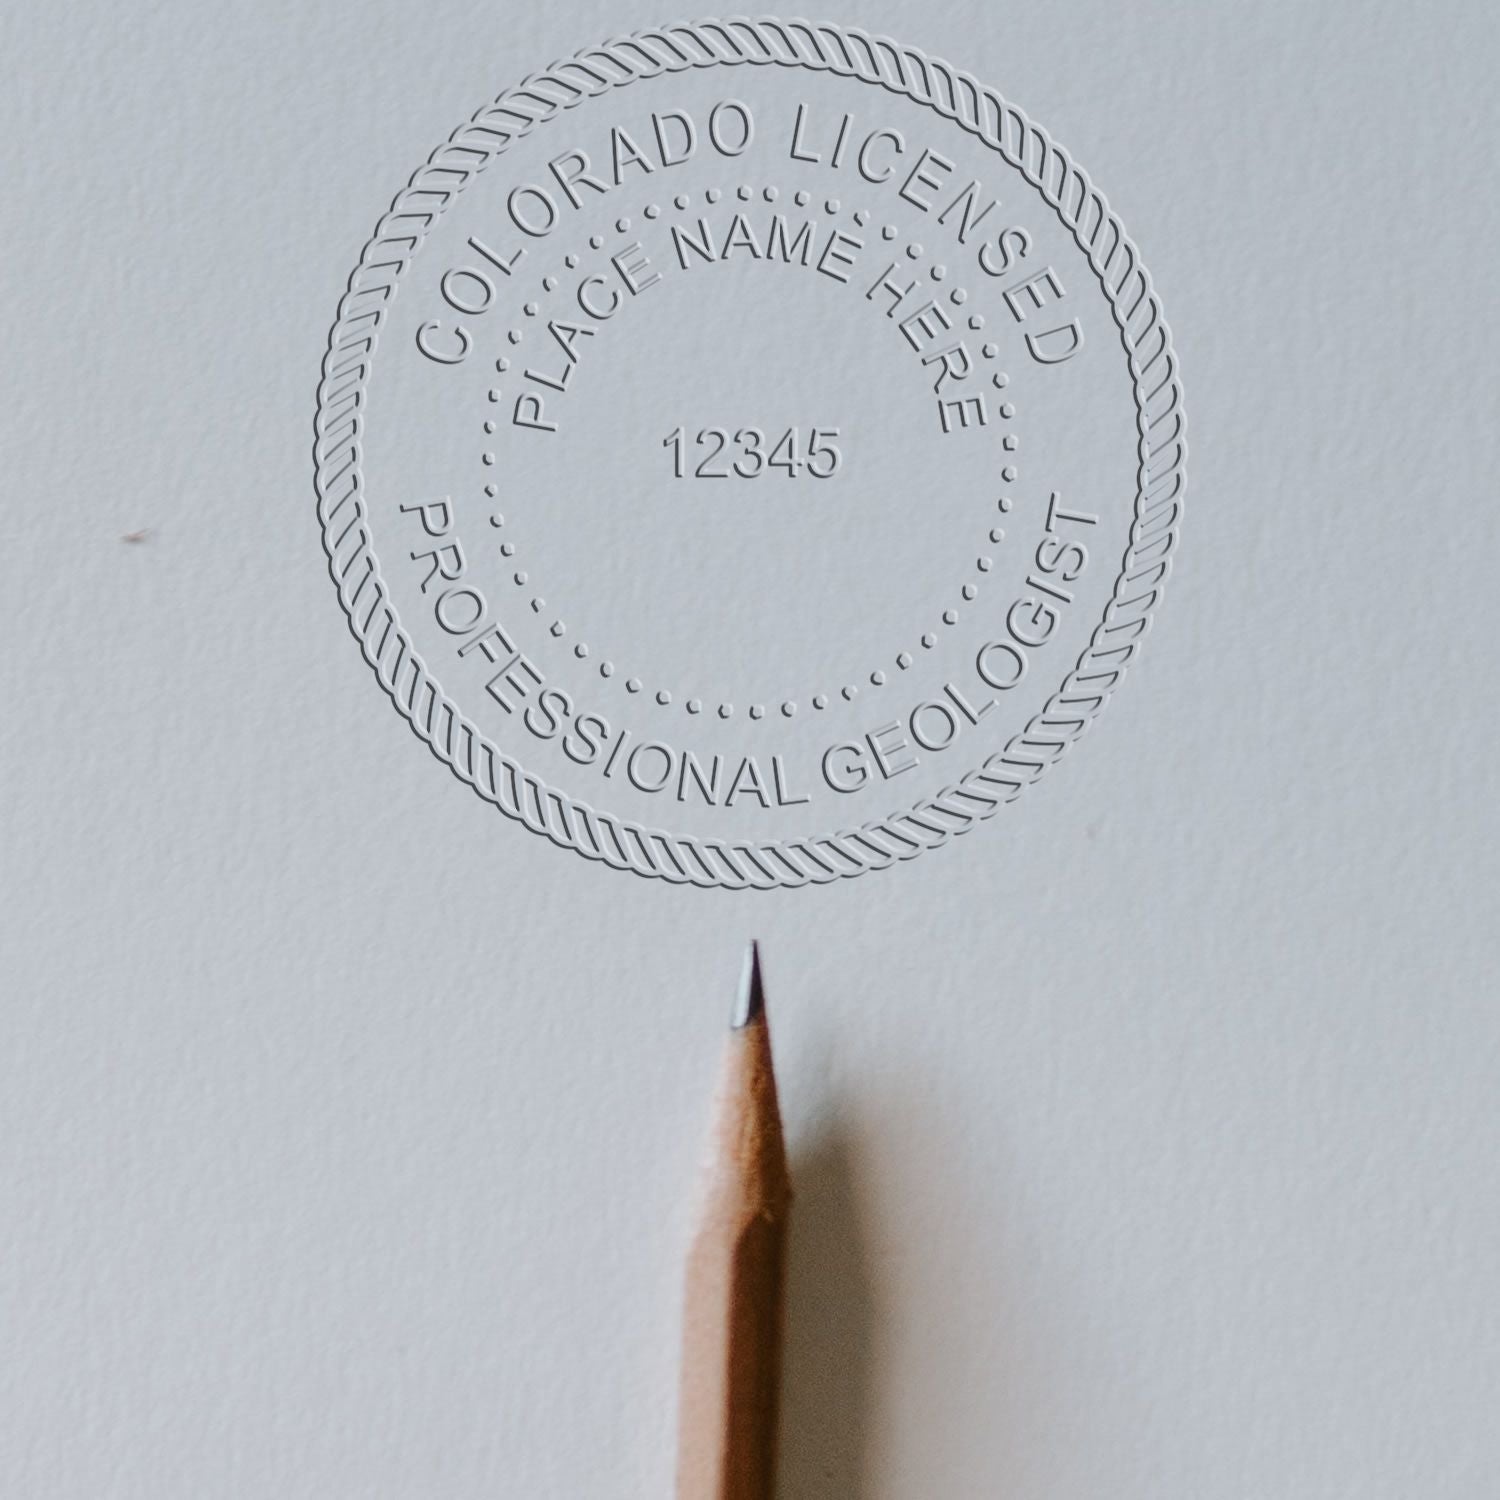 The main image for the Long Reach Colorado Geology Seal depicting a sample of the imprint and imprint sample